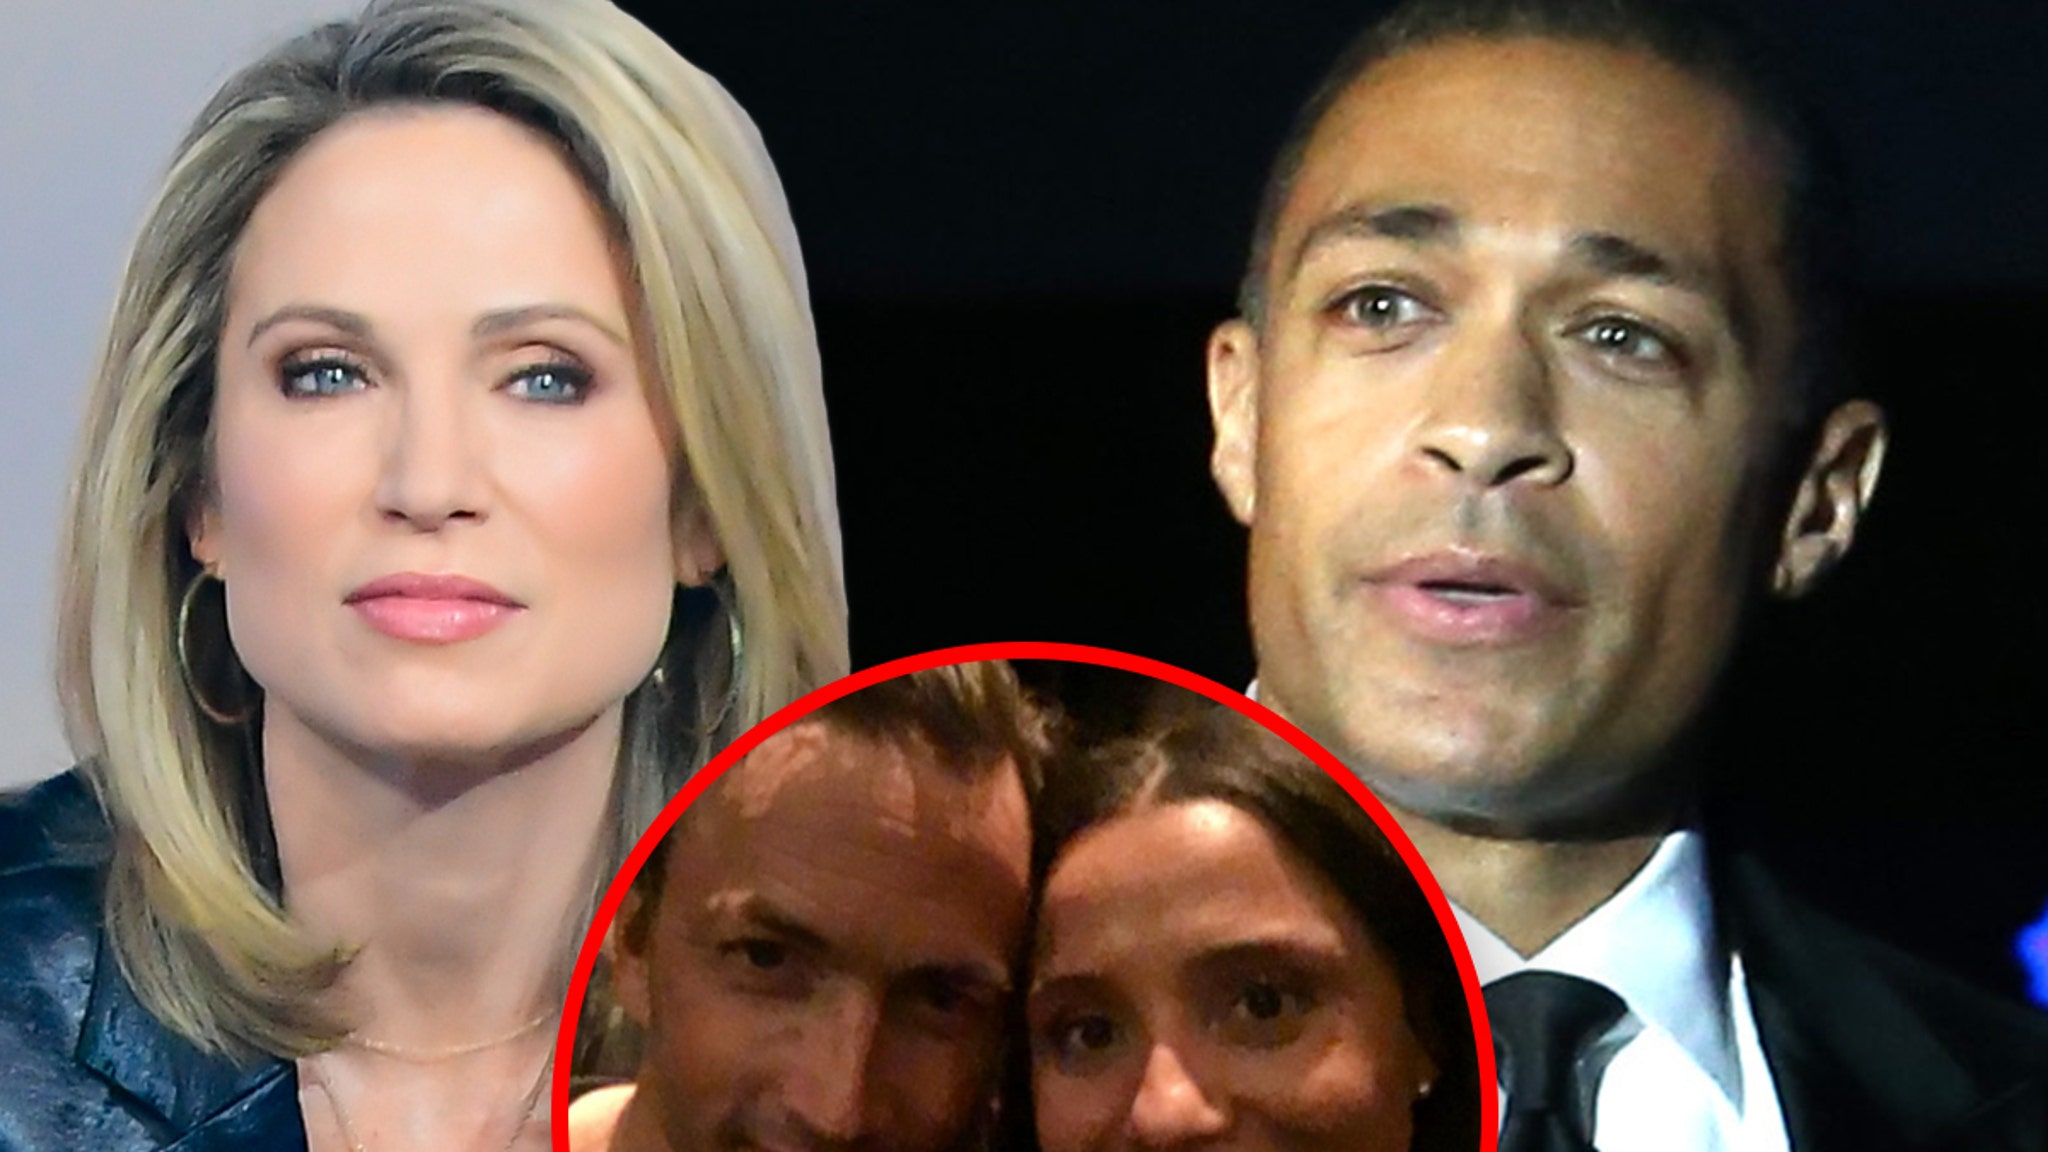 Amy Robach and T.J. Holmes' exes are now dating and posted a selfie together in 2016